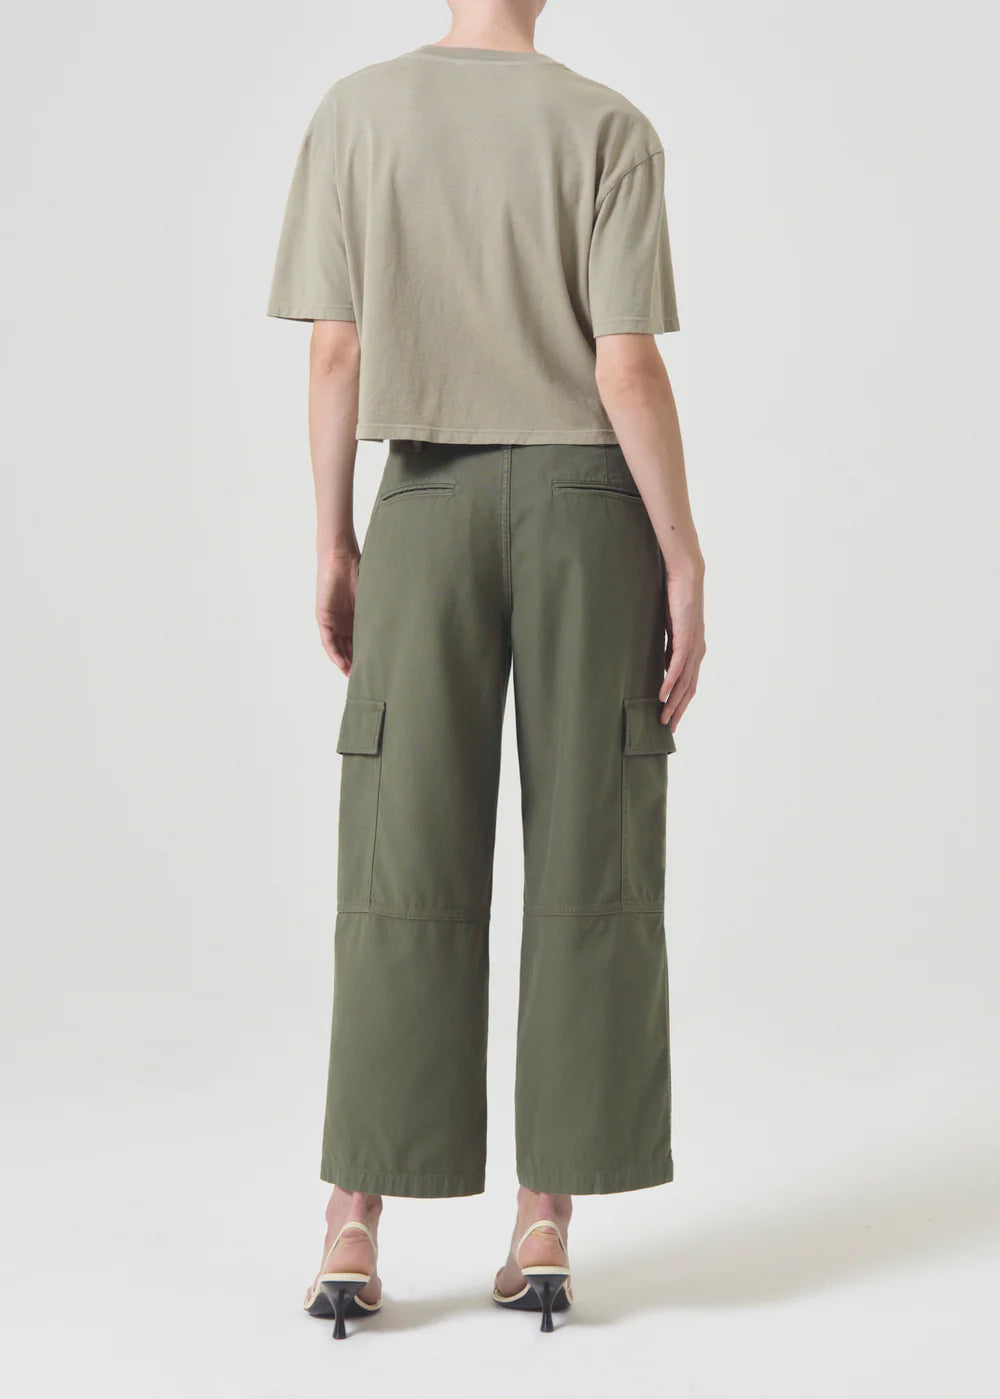 Jericho Pant in Fatigue